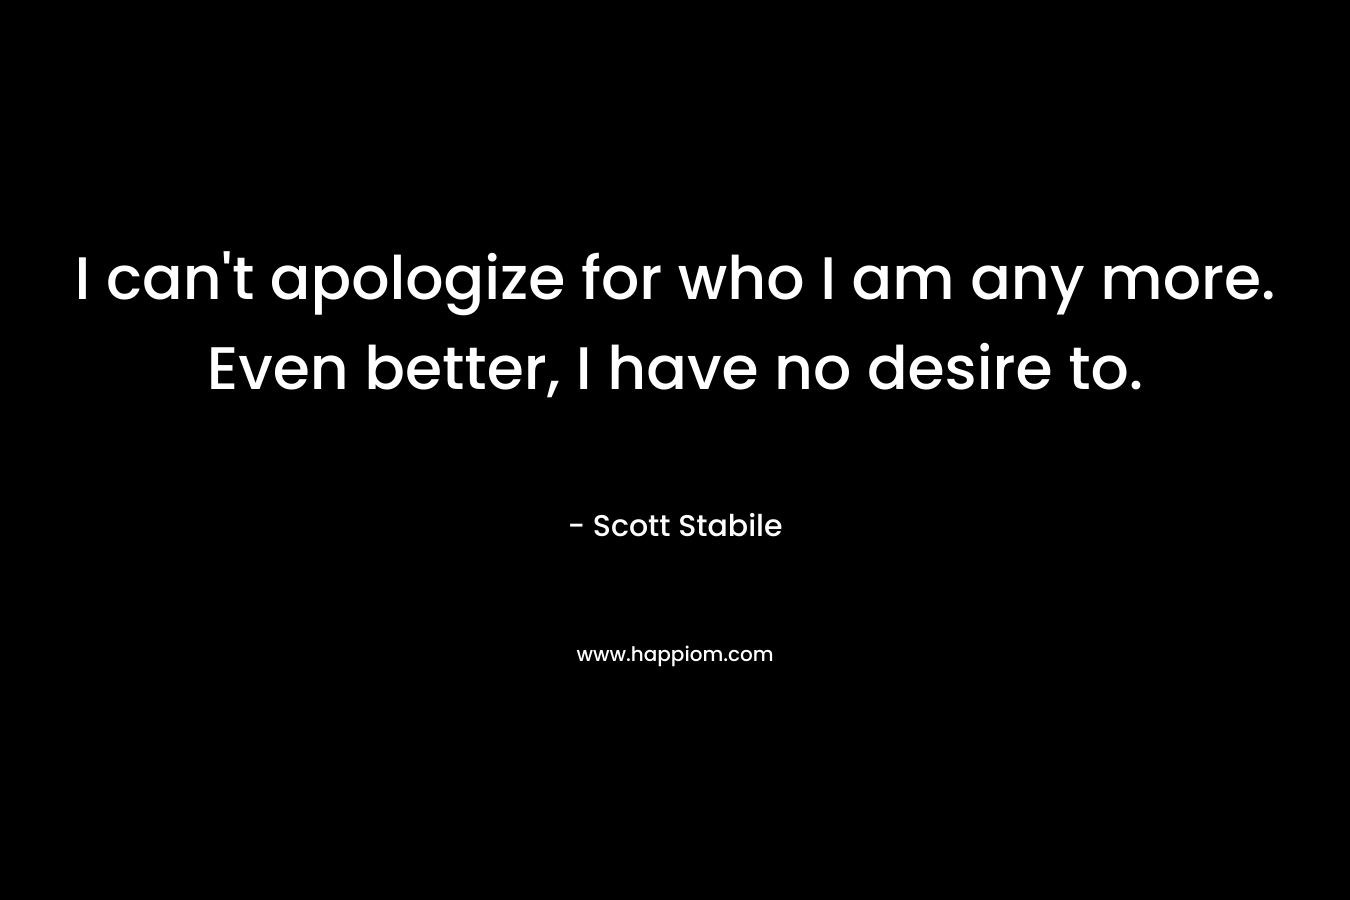 I can’t apologize for who I am any more. Even better, I have no desire to. – Scott Stabile